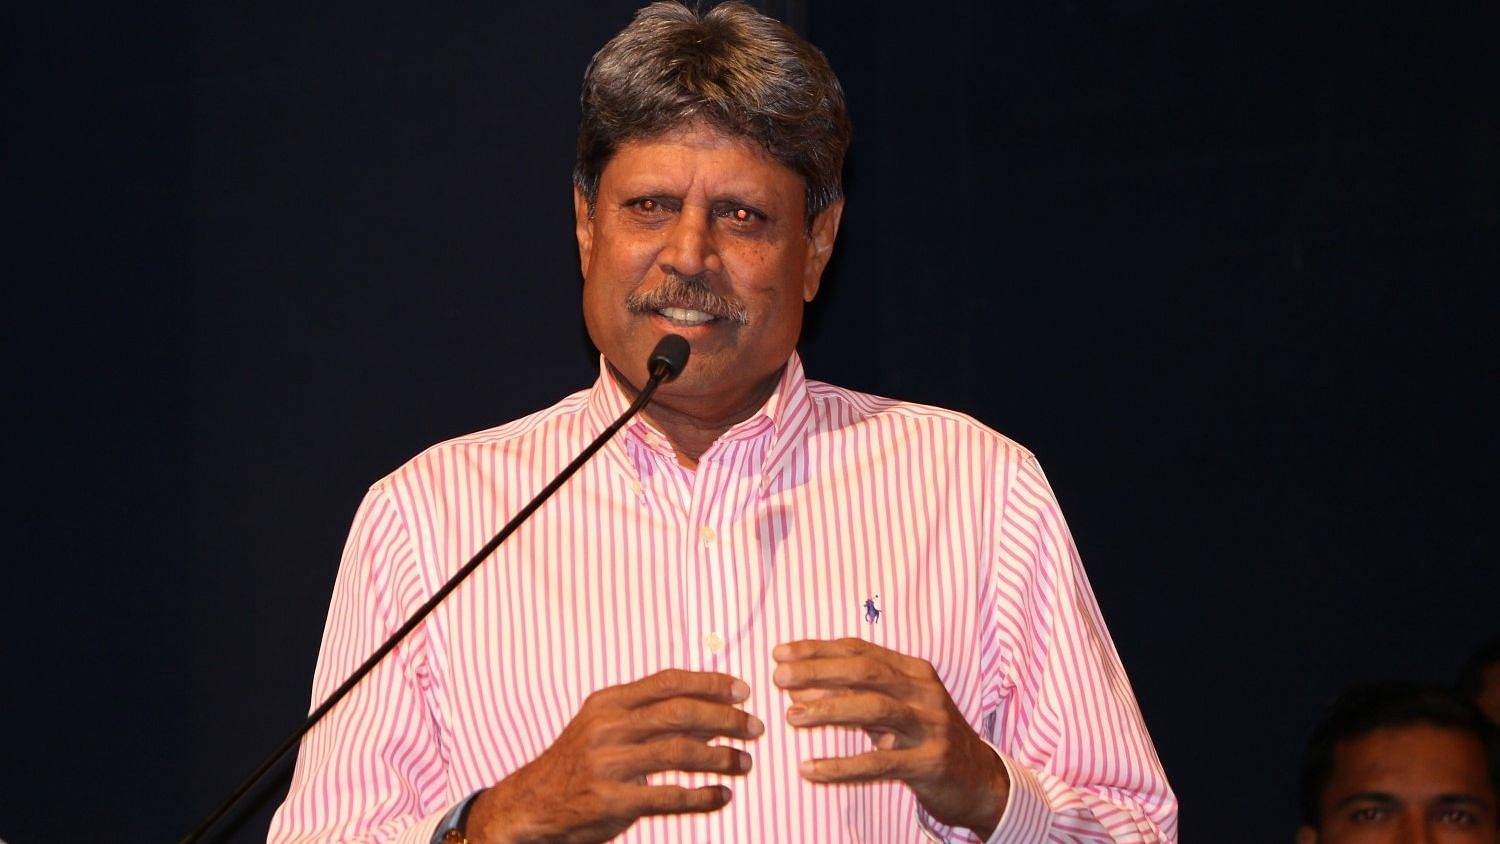 According to media reports, former Indian cricket captain Kapil Dev has suffered a heart attack and is currently hospitalised in Delhi.